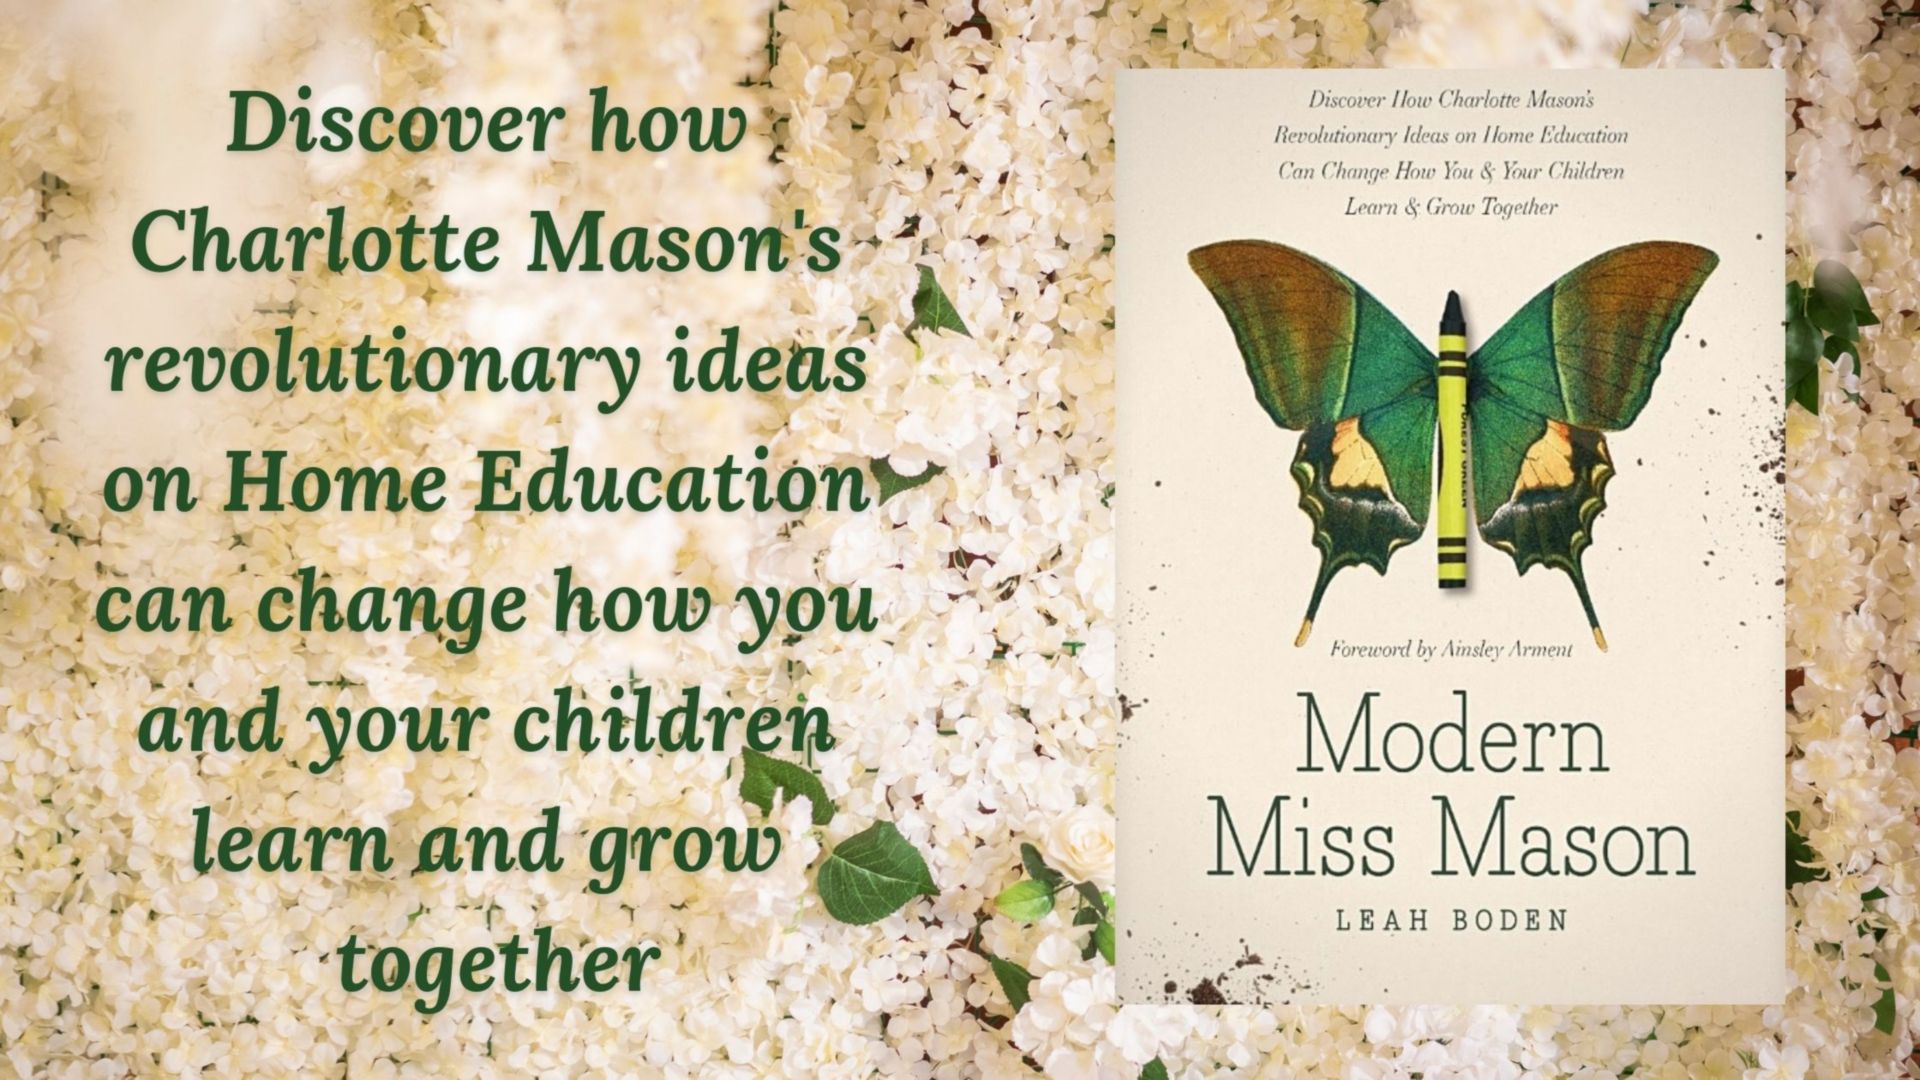 Interview with Leah Boden on her book 'Modern Miss Mason'